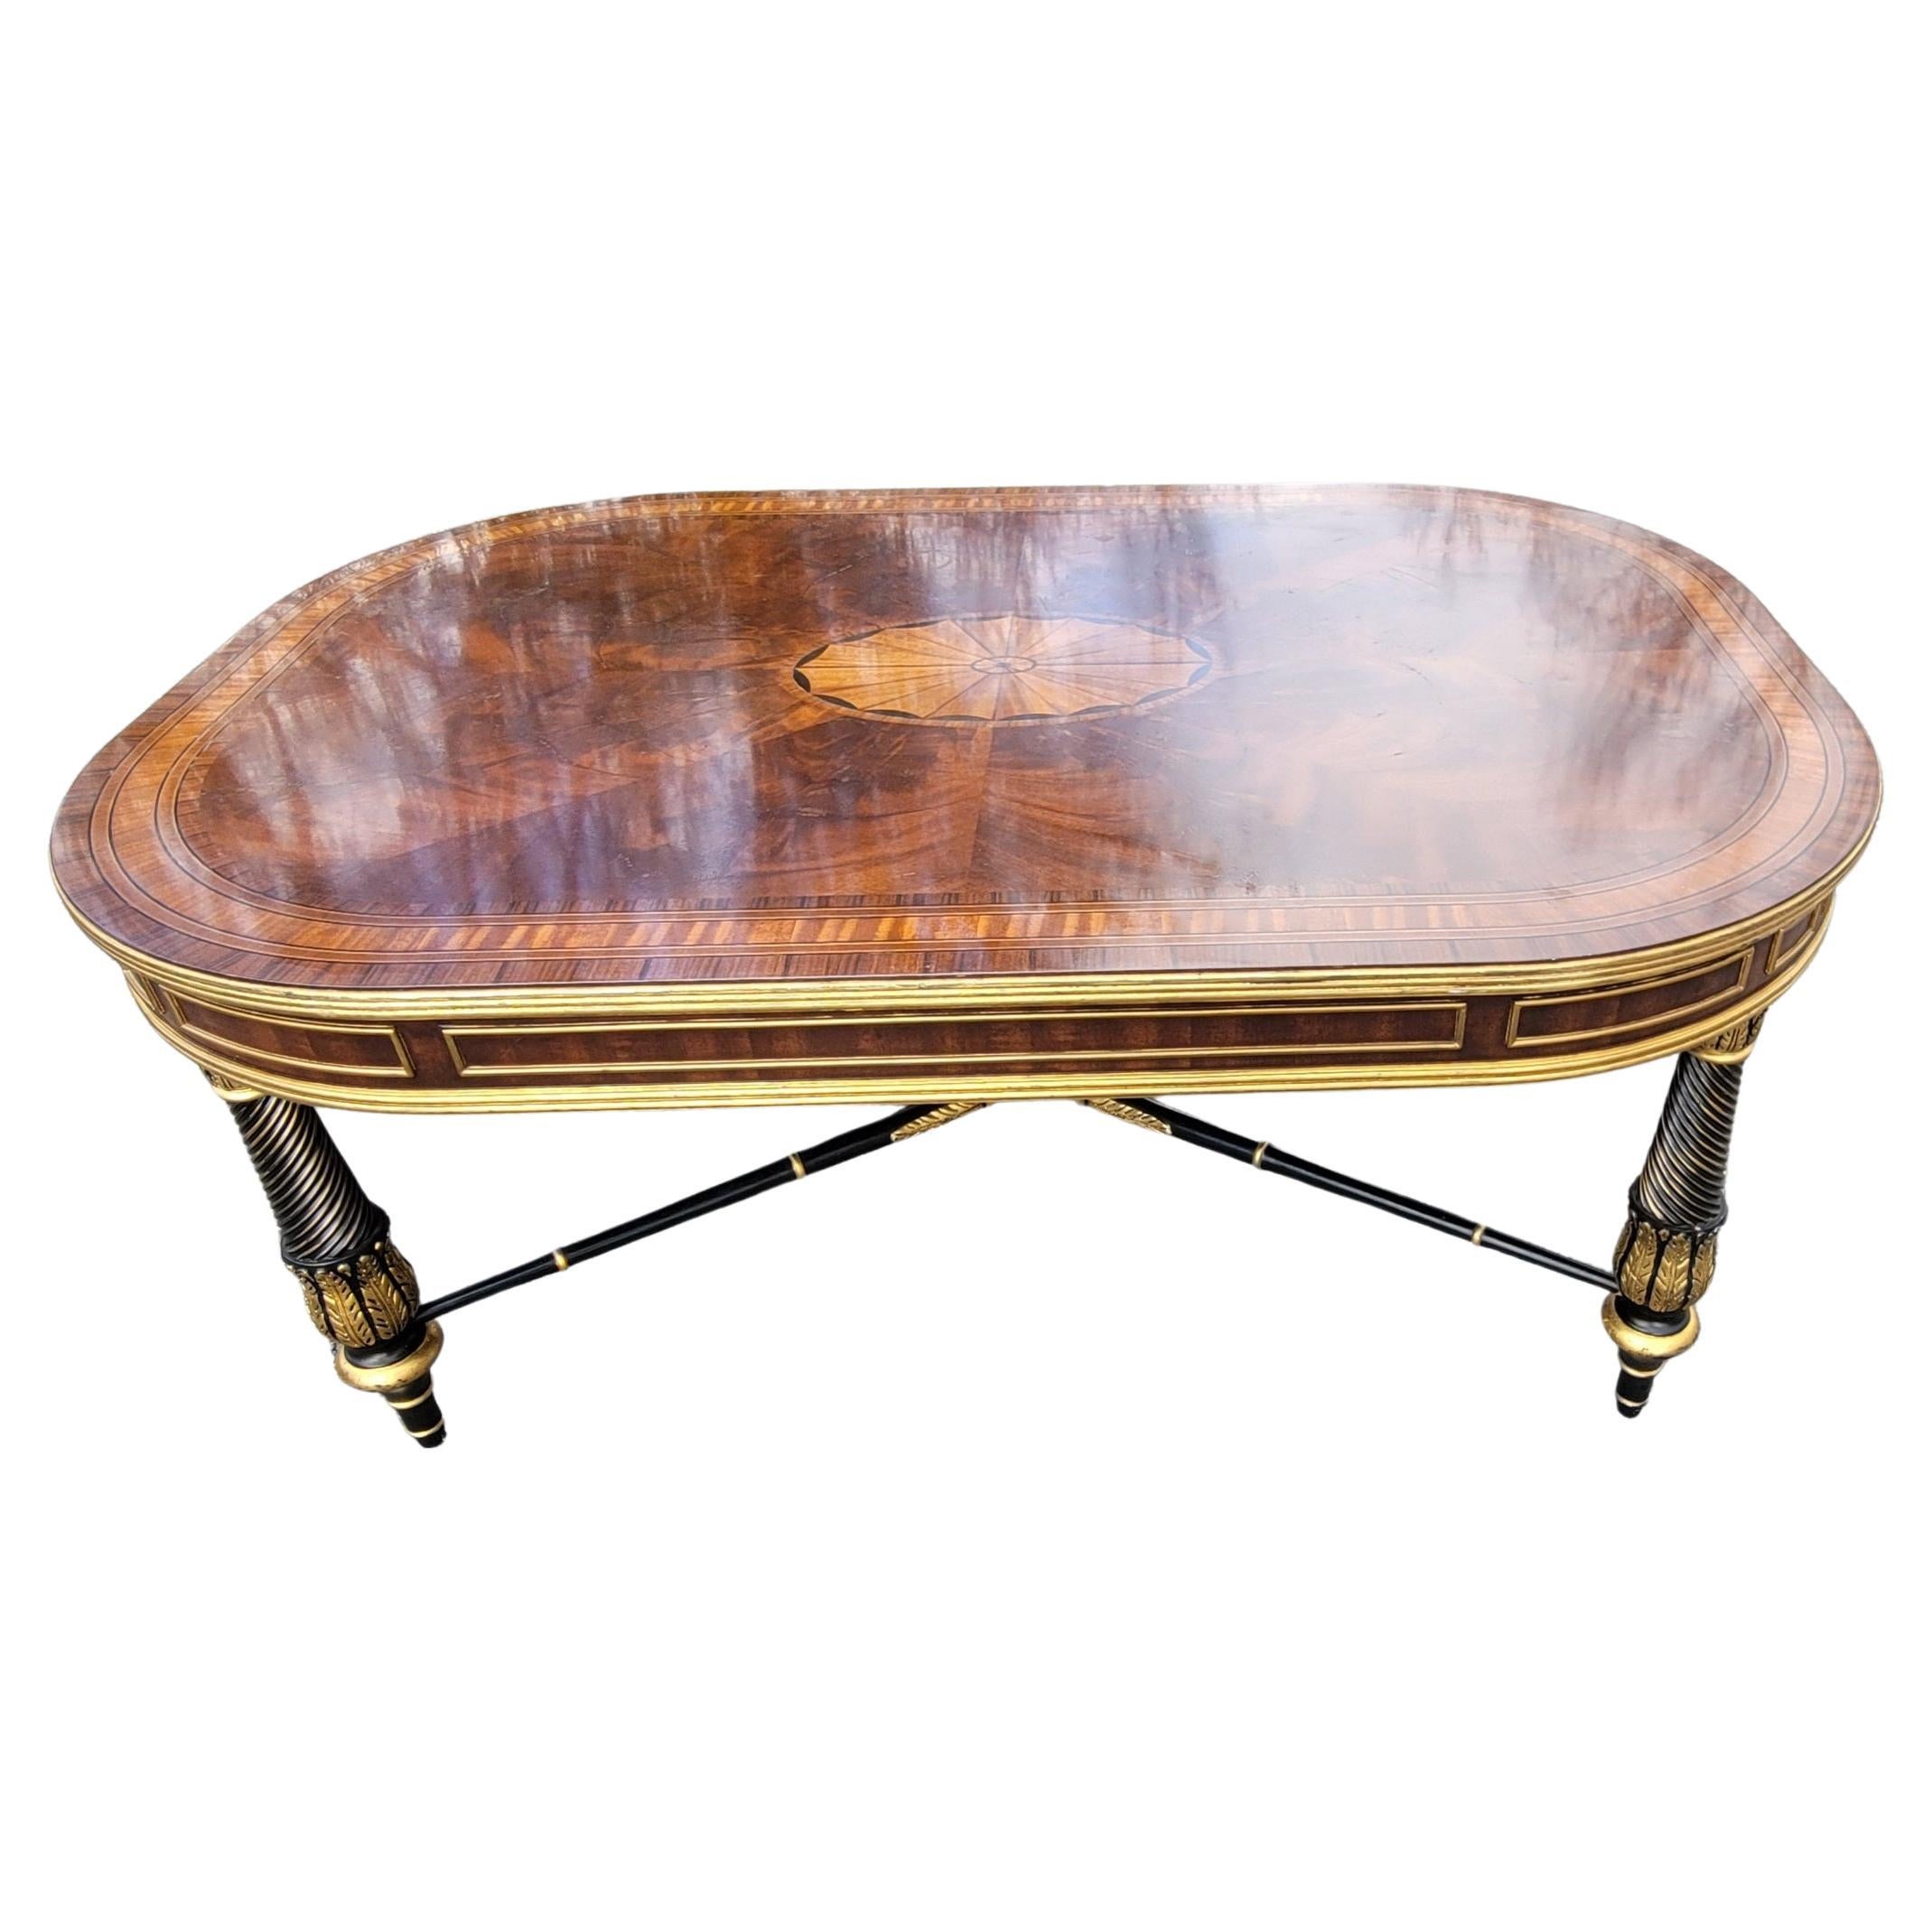 20th Century E.J Victor Regency Style Ebonized and Parcel Gilt Marquetry Inlaid Coffee Table